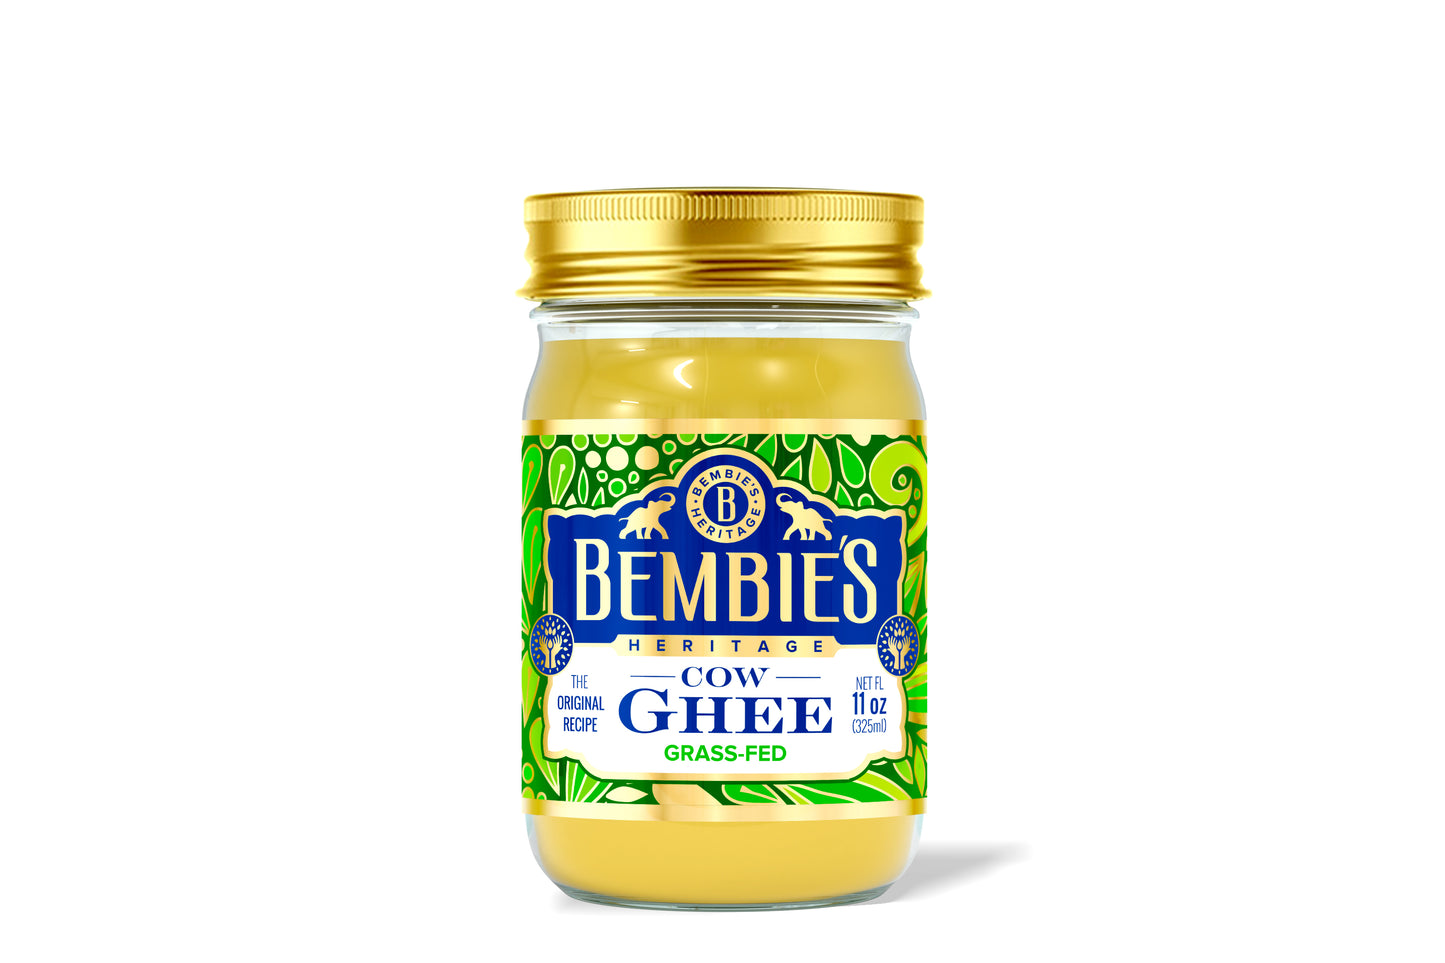 Glass jar filled with ghee 11 oz